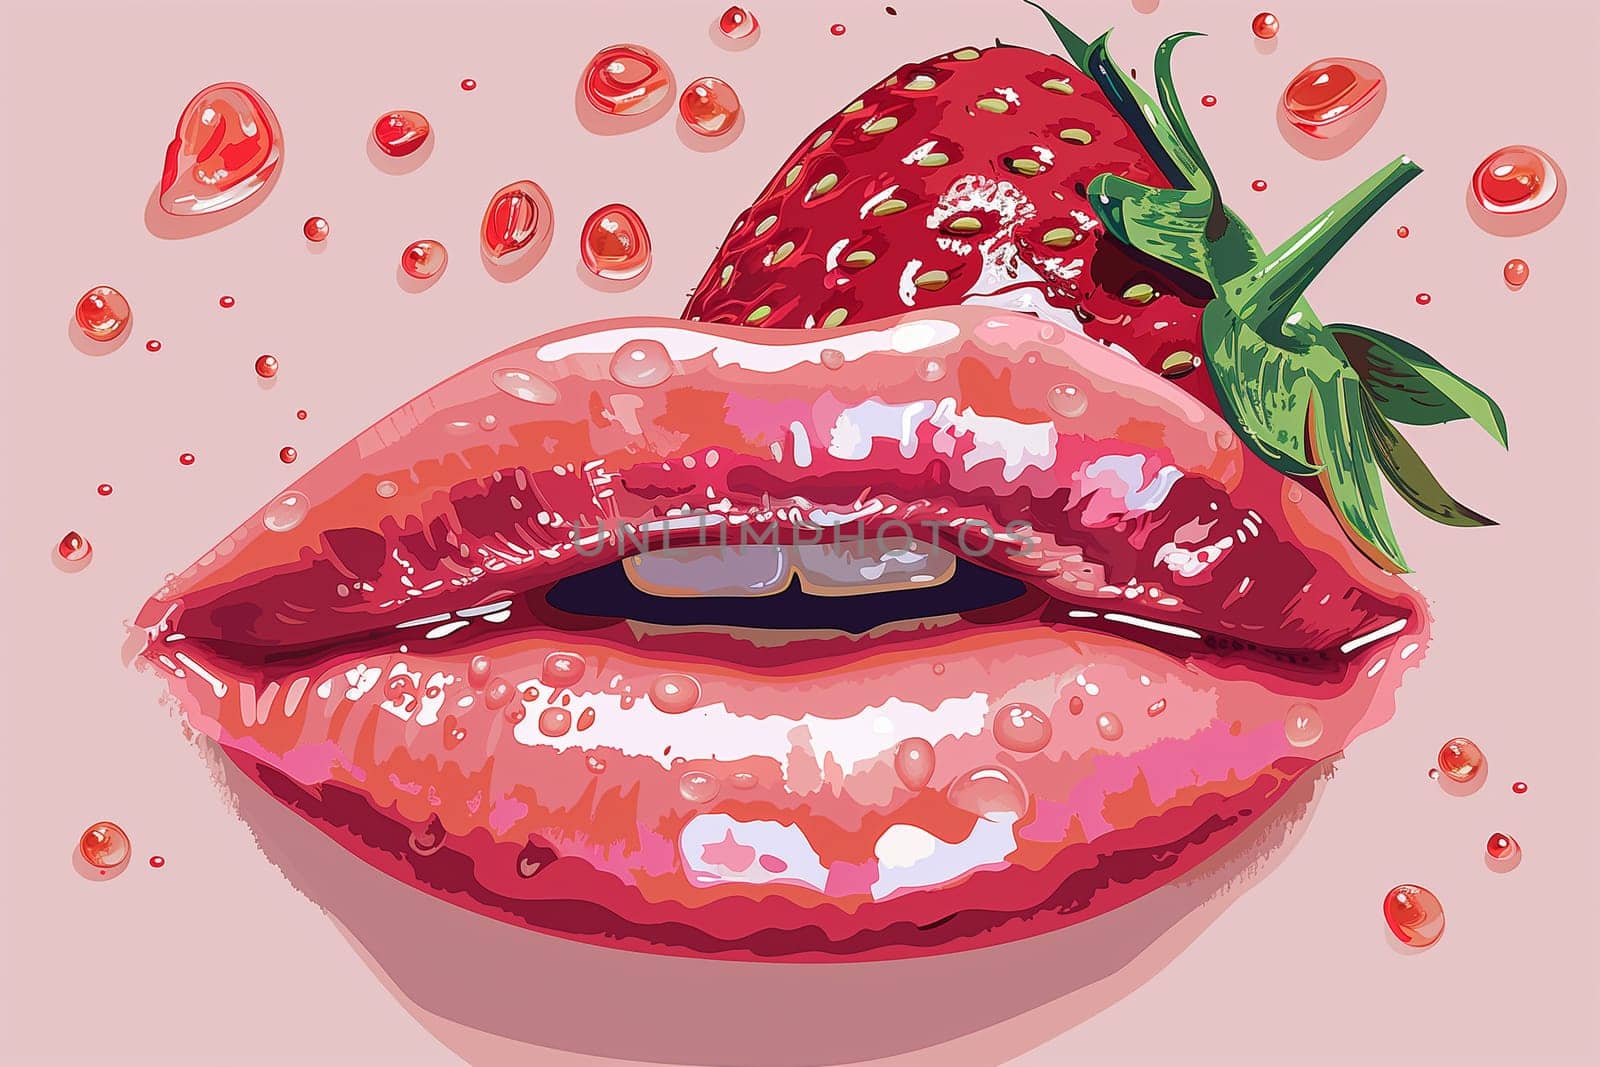 A painting featuring a vibrant red strawberry and a close-up of a womans dark pink lips.